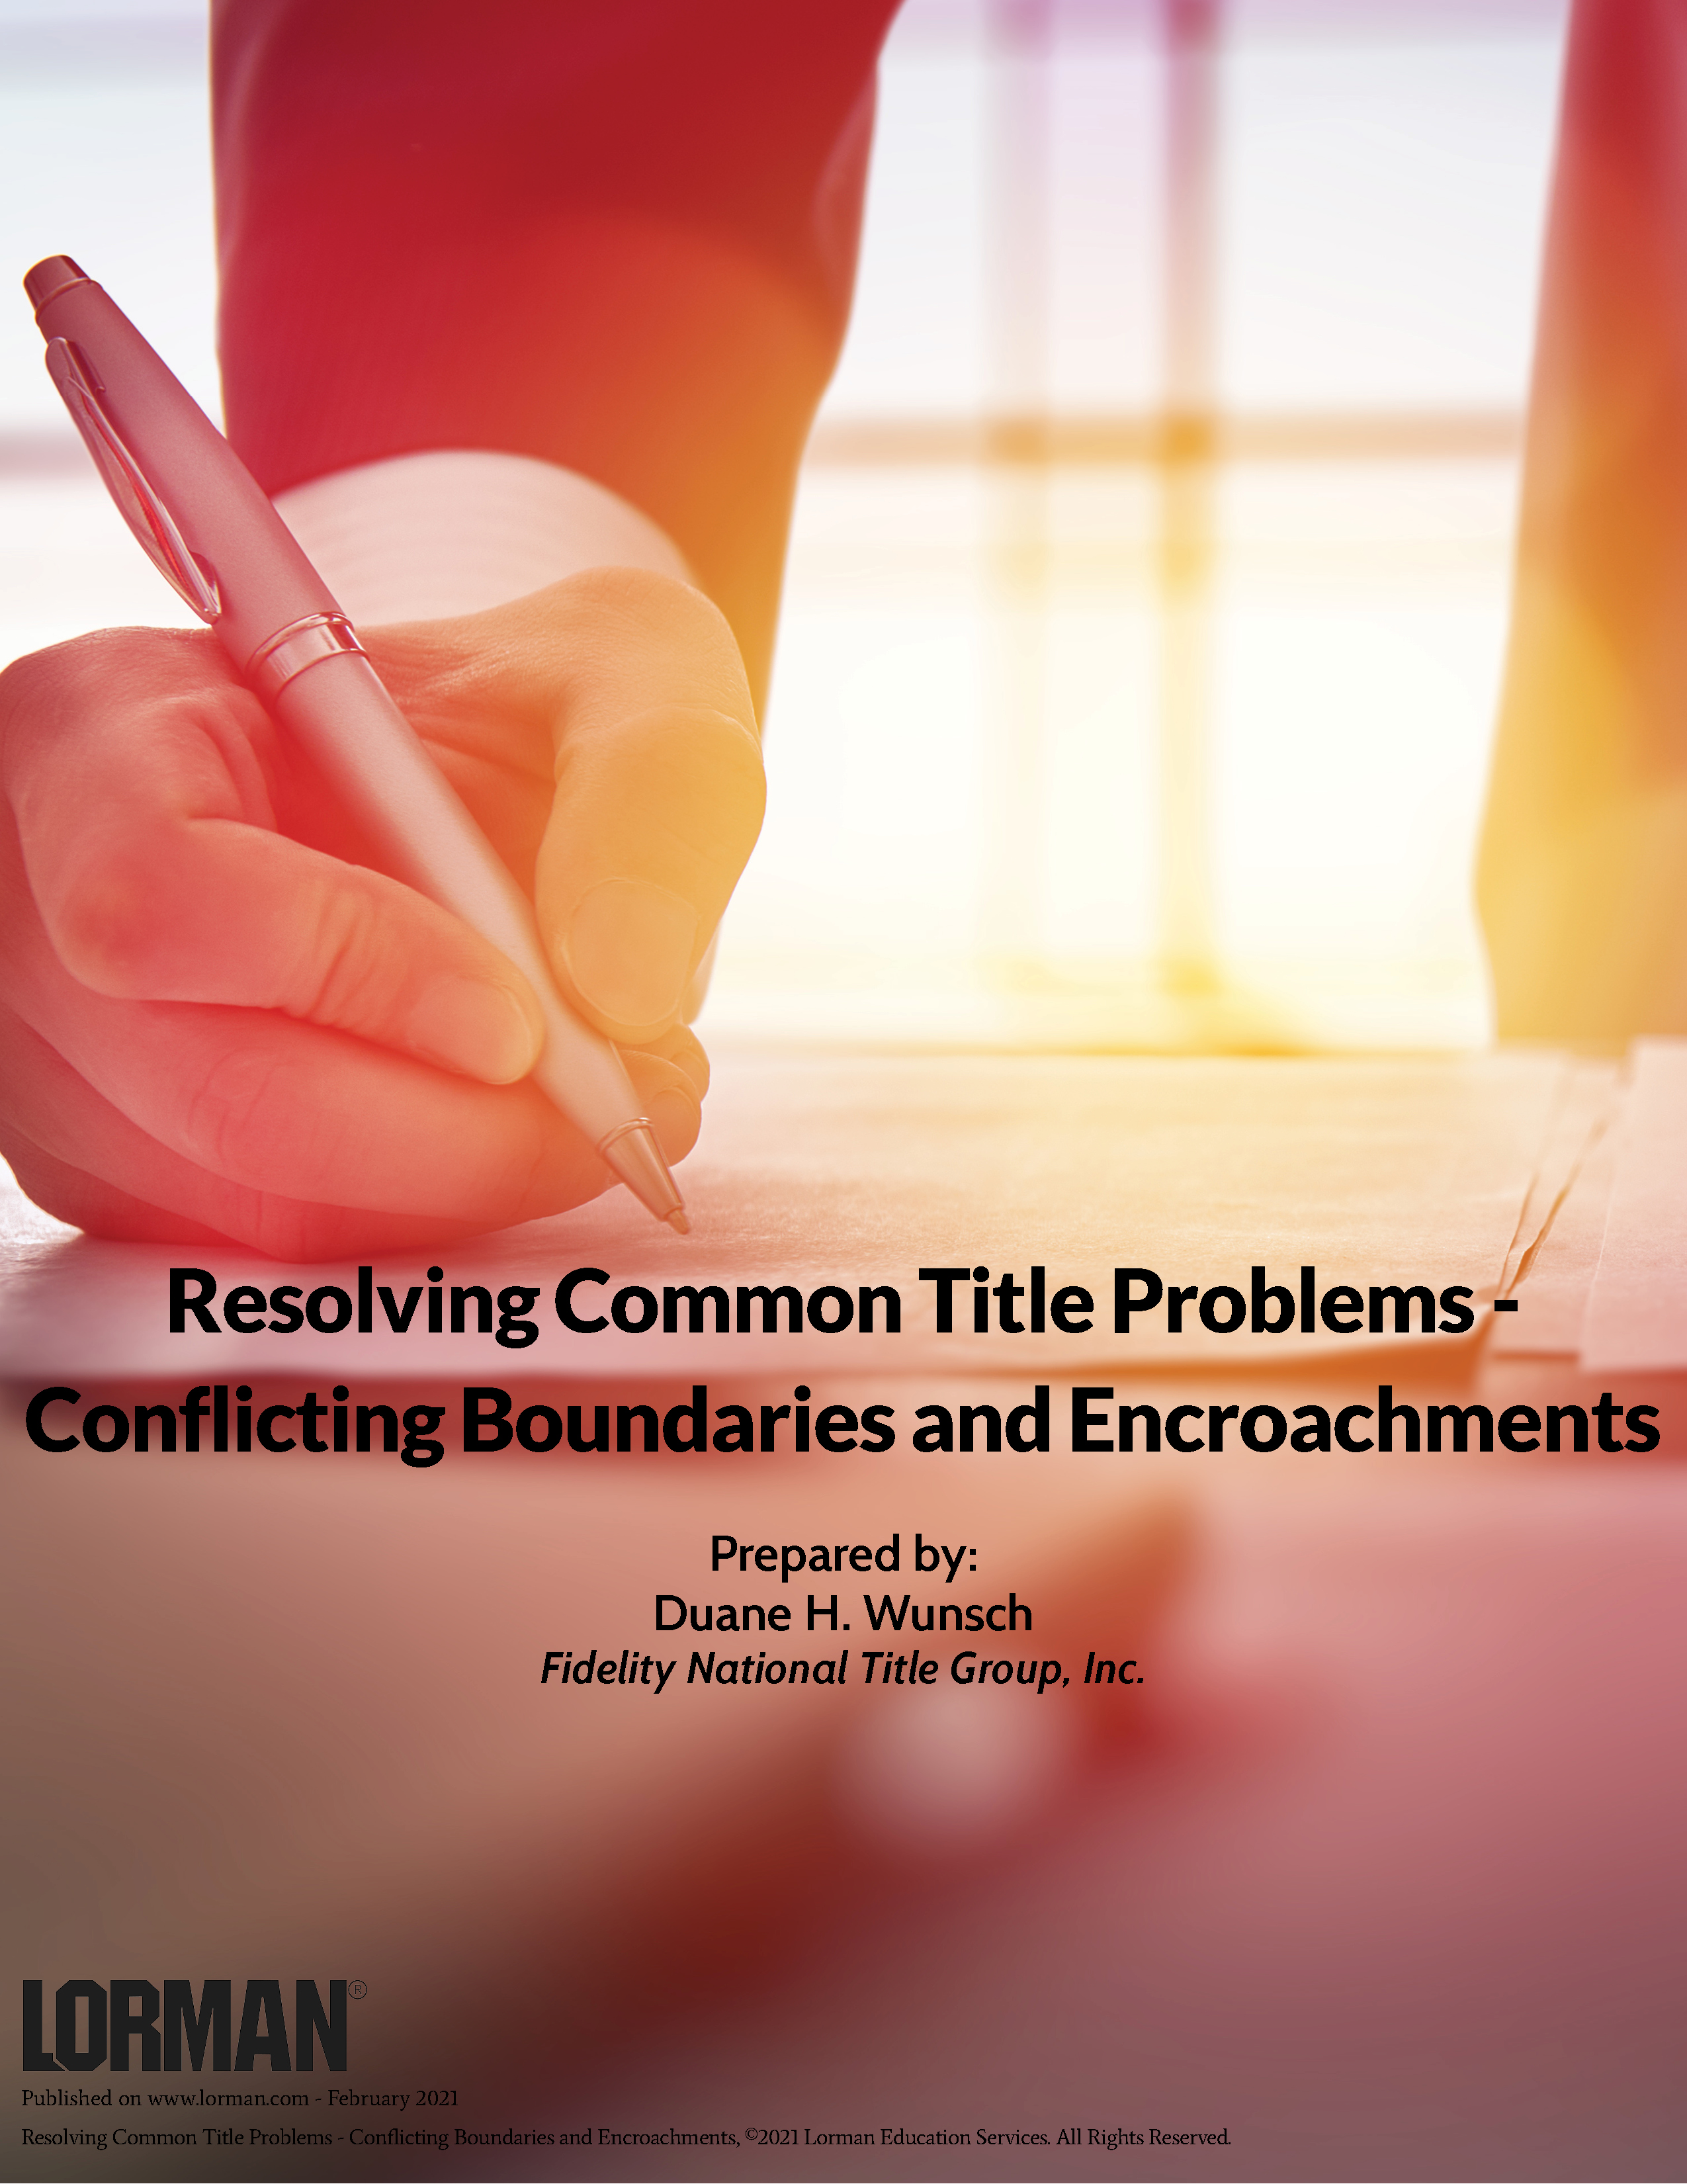 Resolving Common Title Problems - Conflicting Boundaries and Encroachments